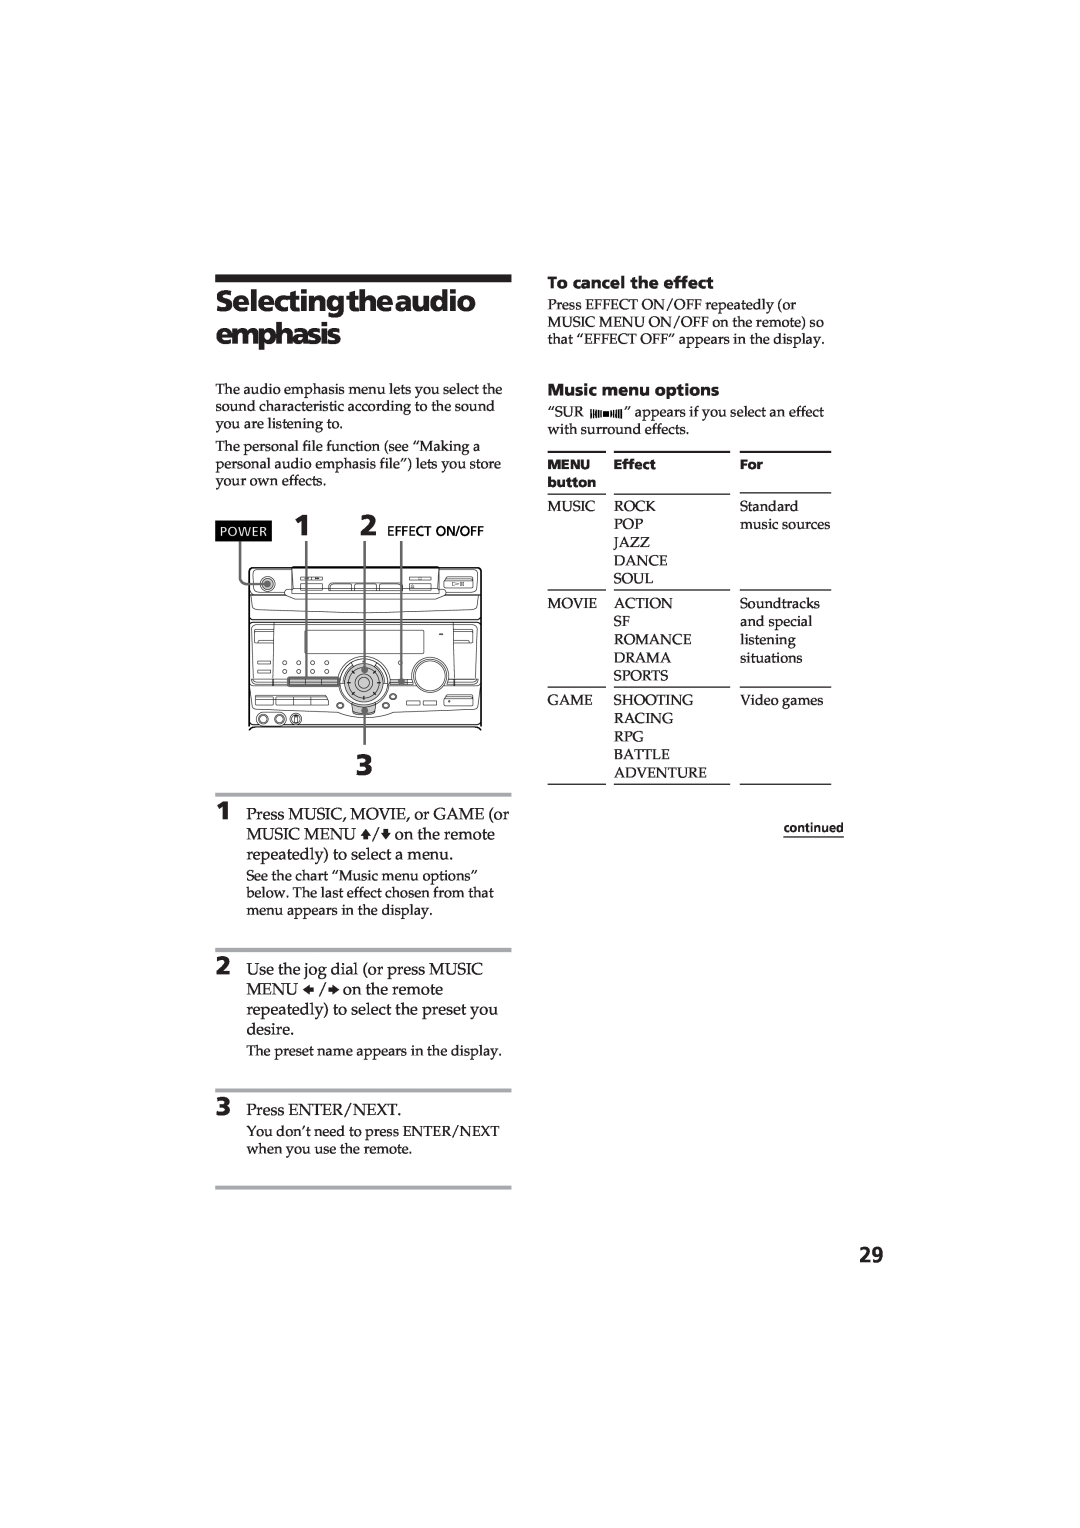 Sony MHC-RX80 manual Selectingtheaudio emphasis, To cancel the effect, Music menu options 